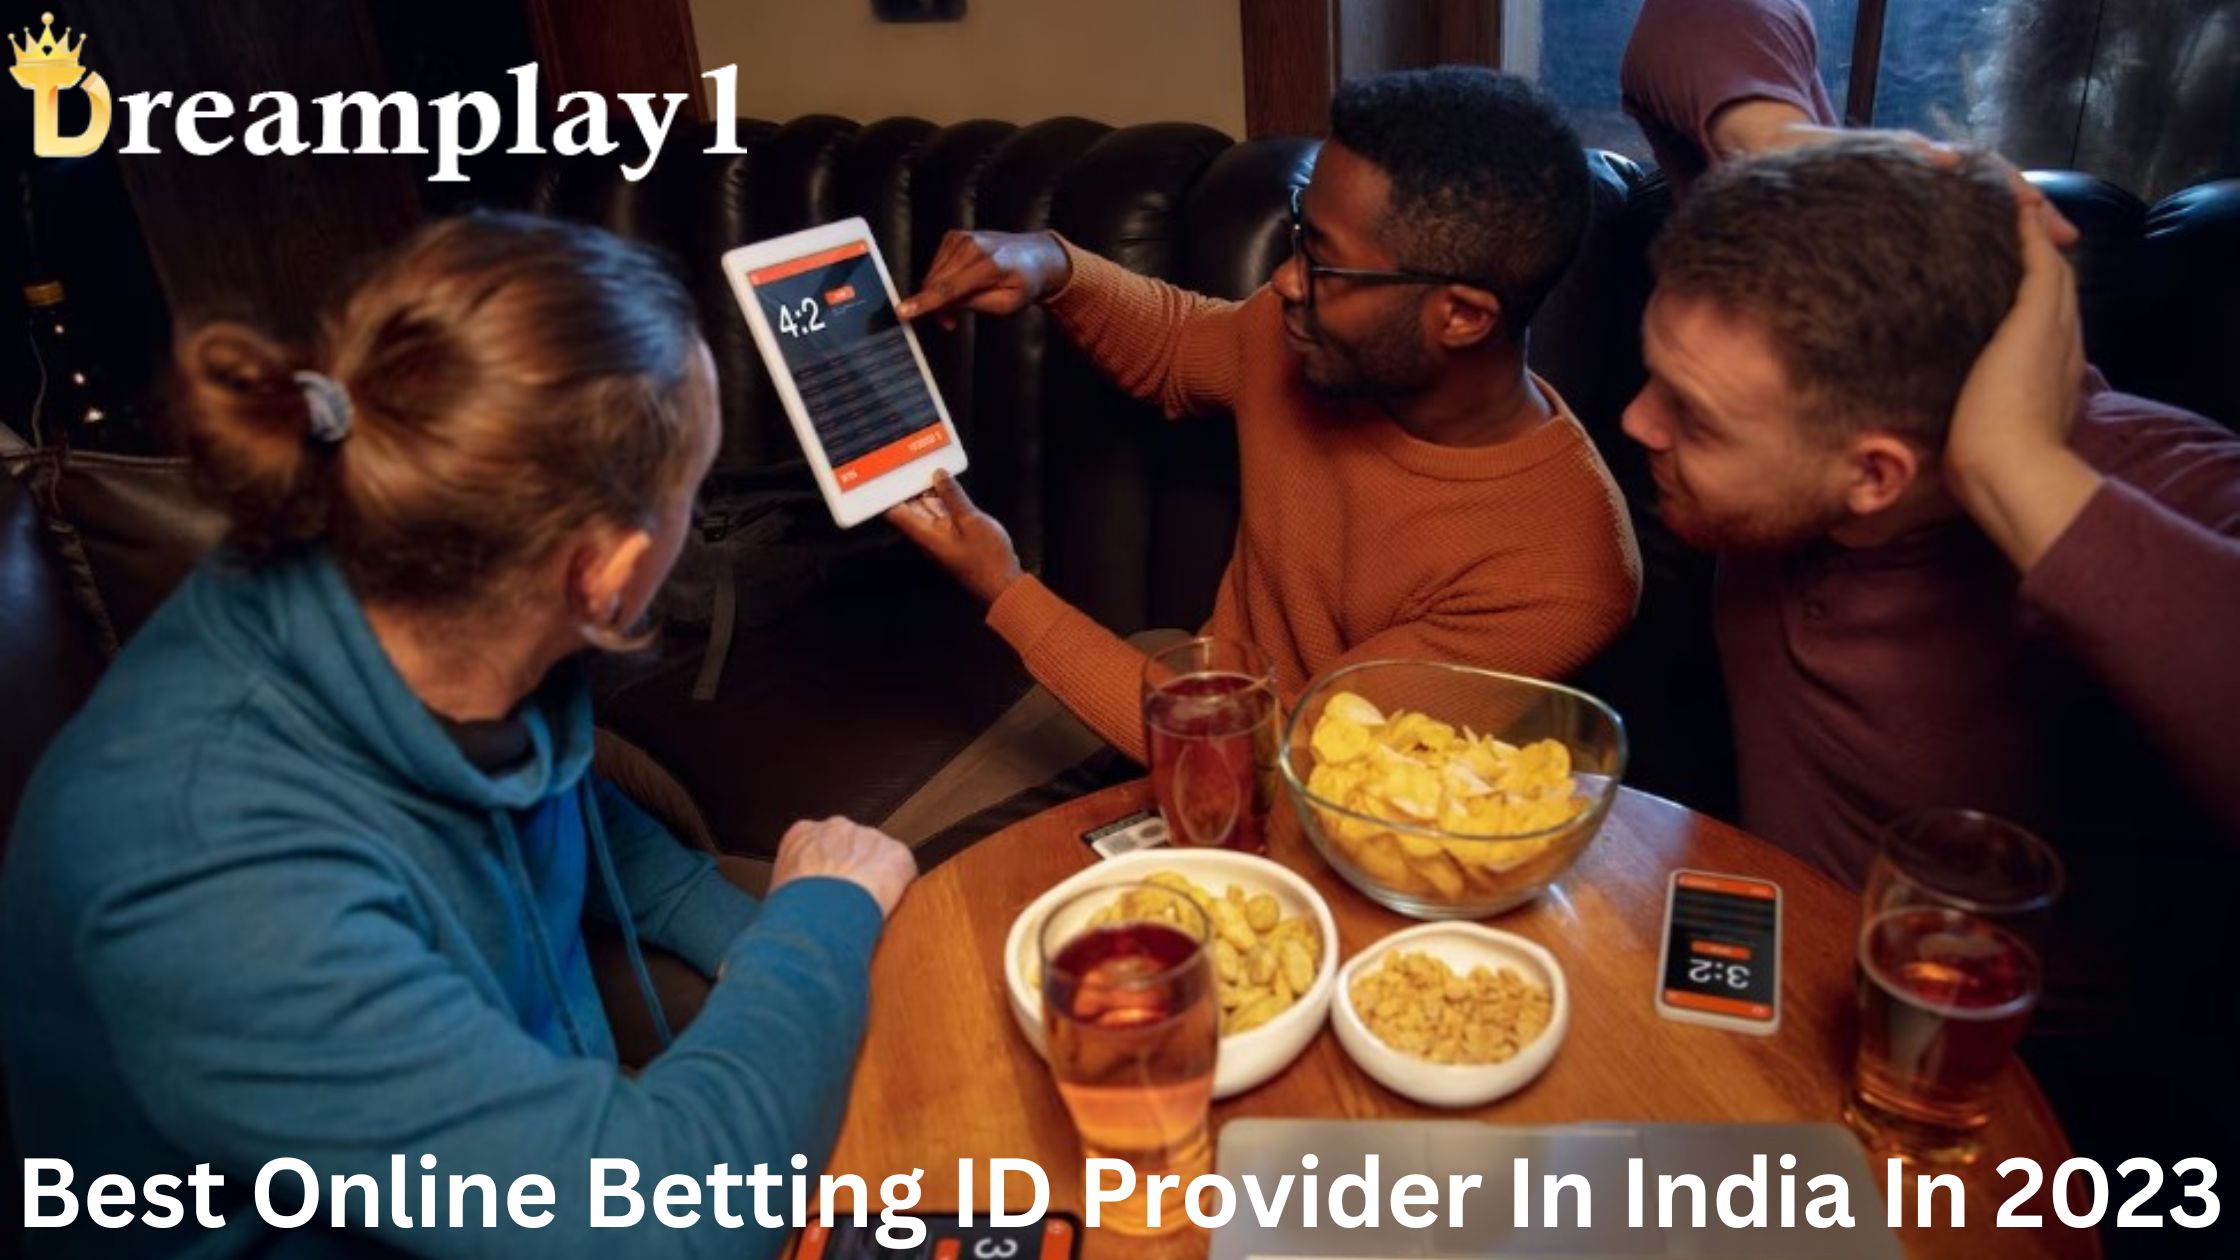 Best Online Betting ID Provider In India